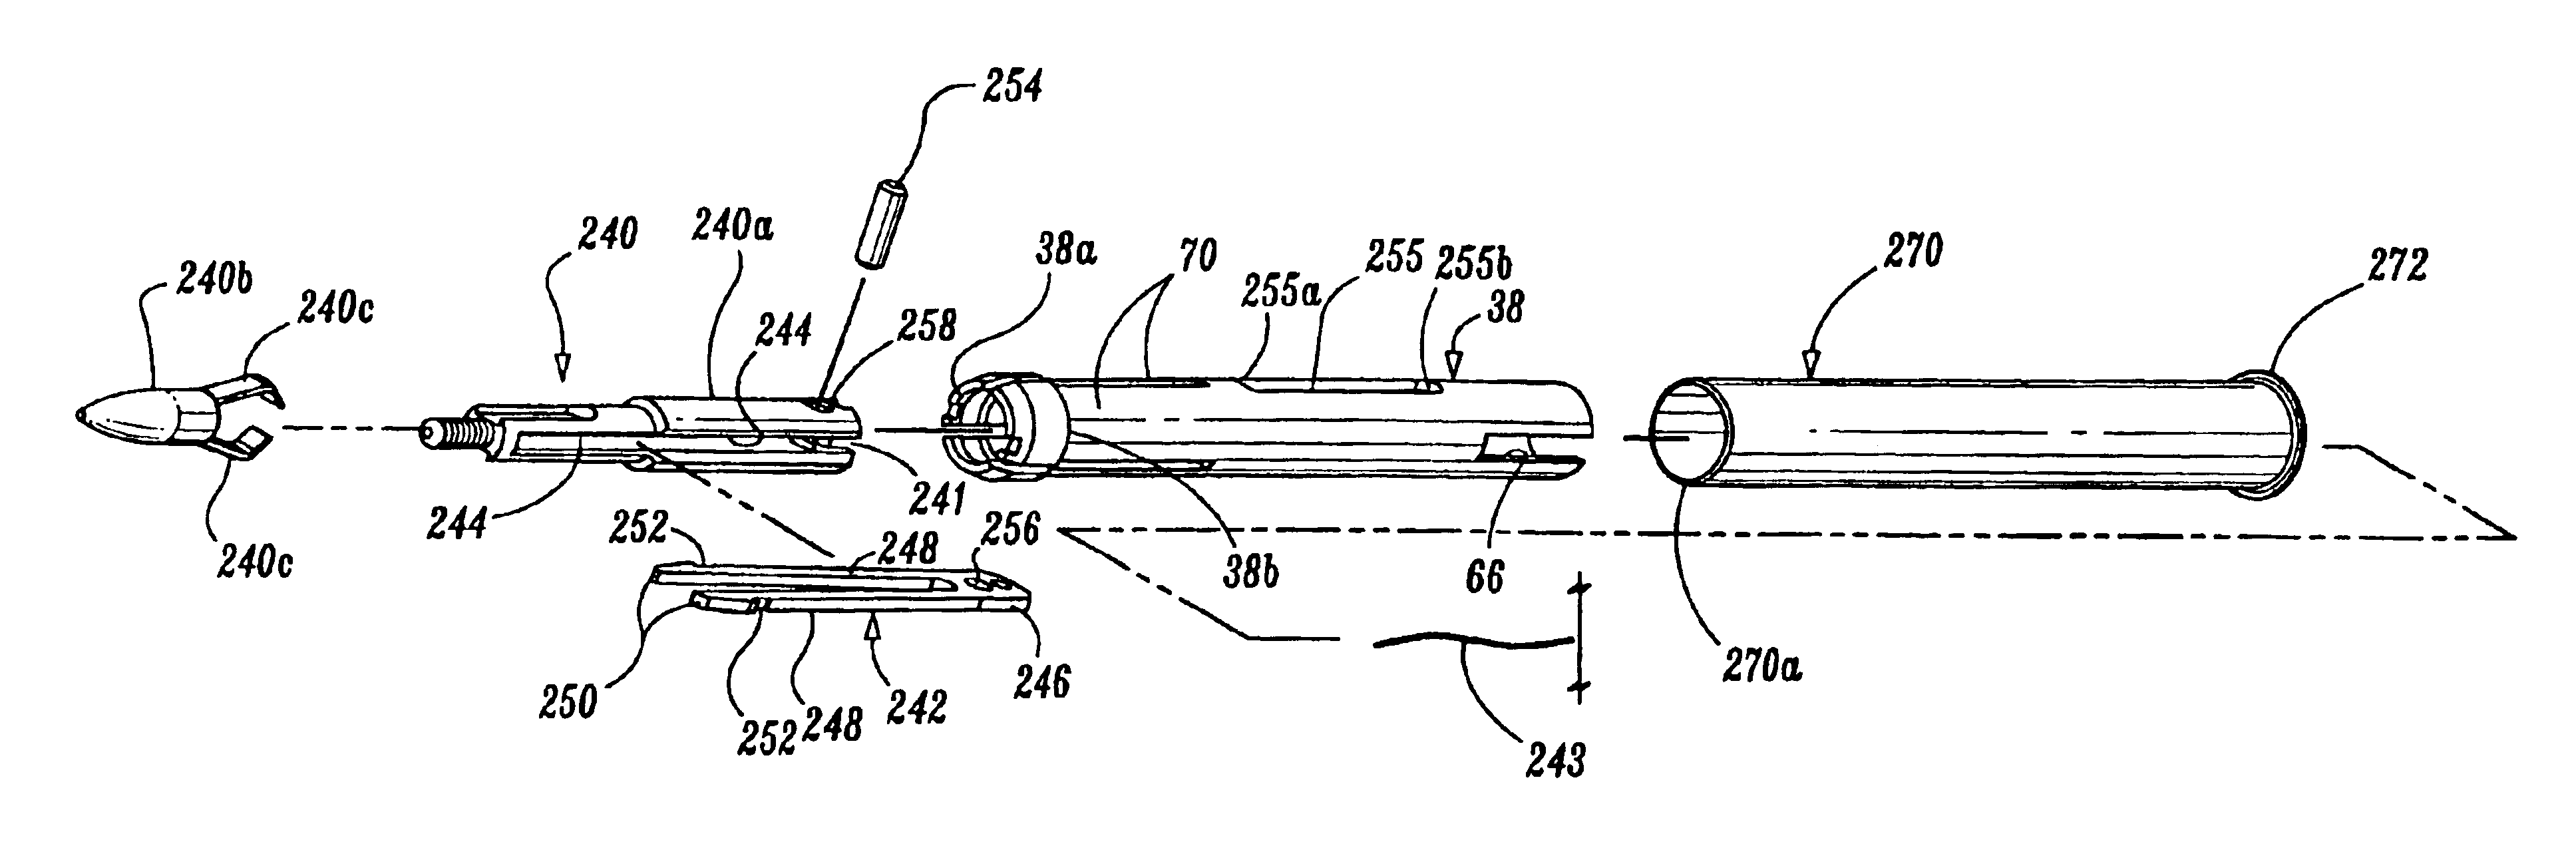 Surgical stapling device for performing circular anastomoses